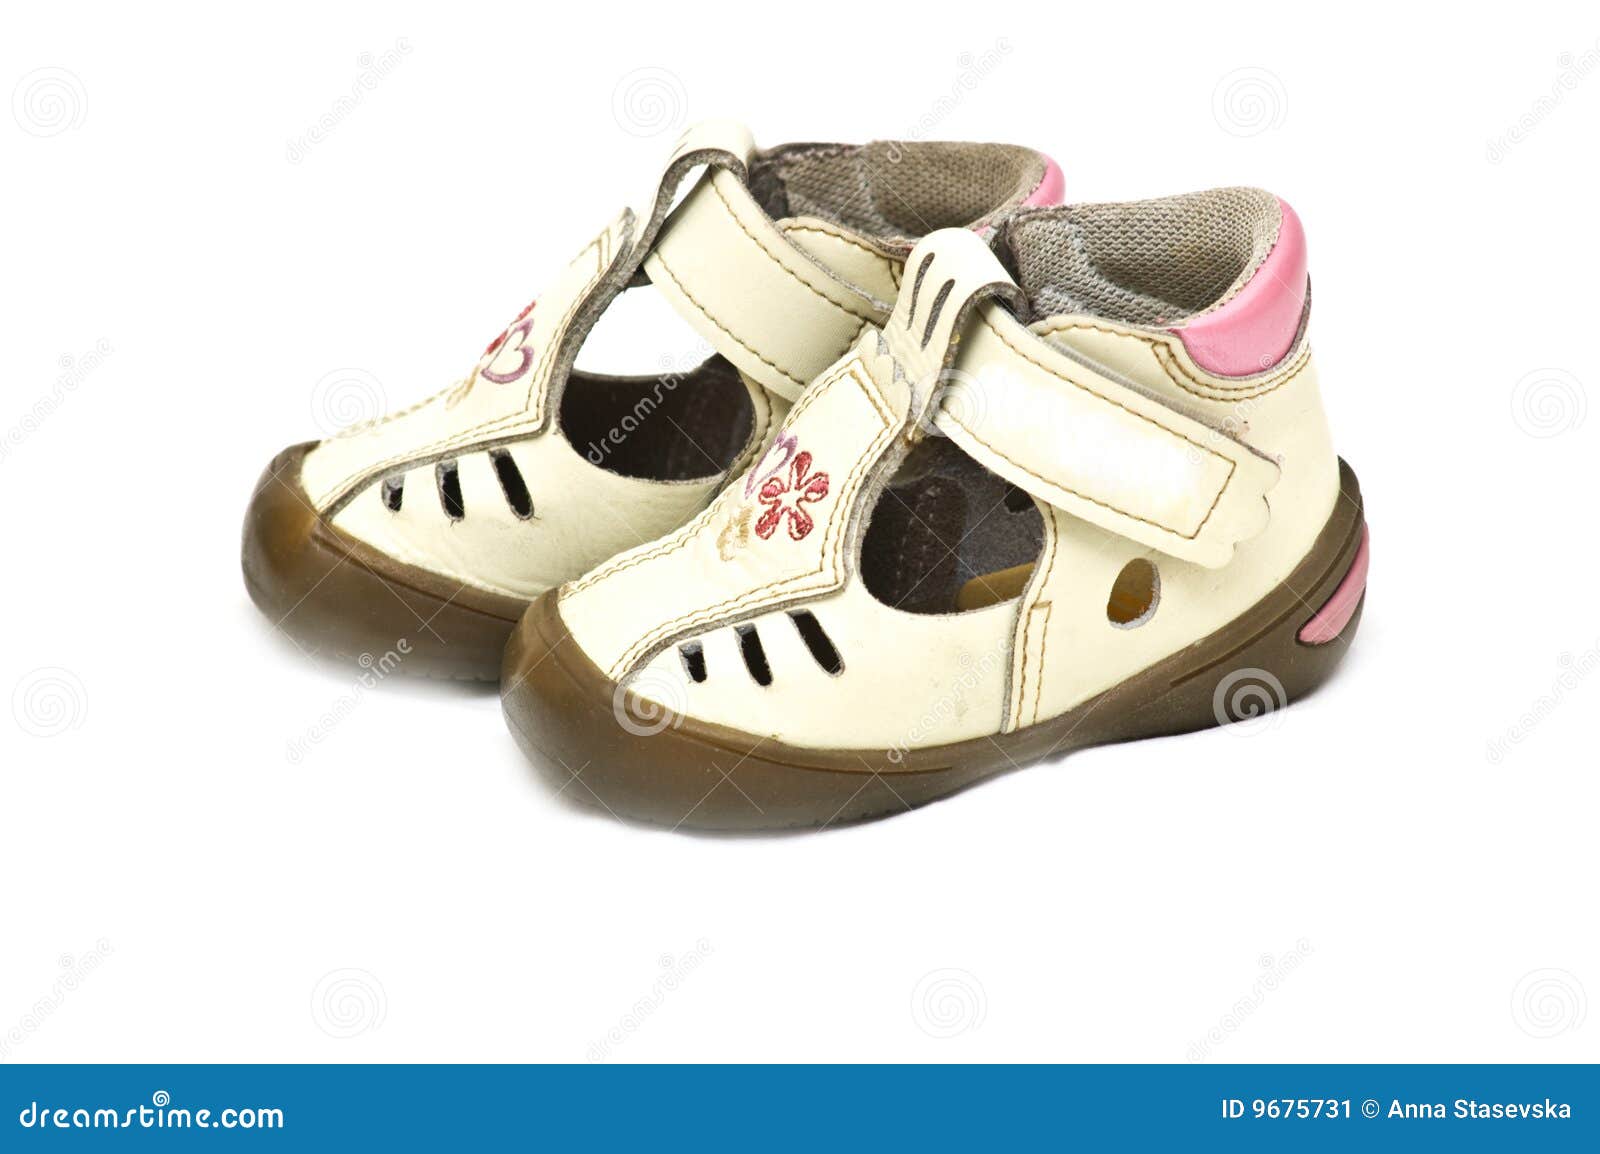 Baby First Sandals Stock Image - Image: 9675731